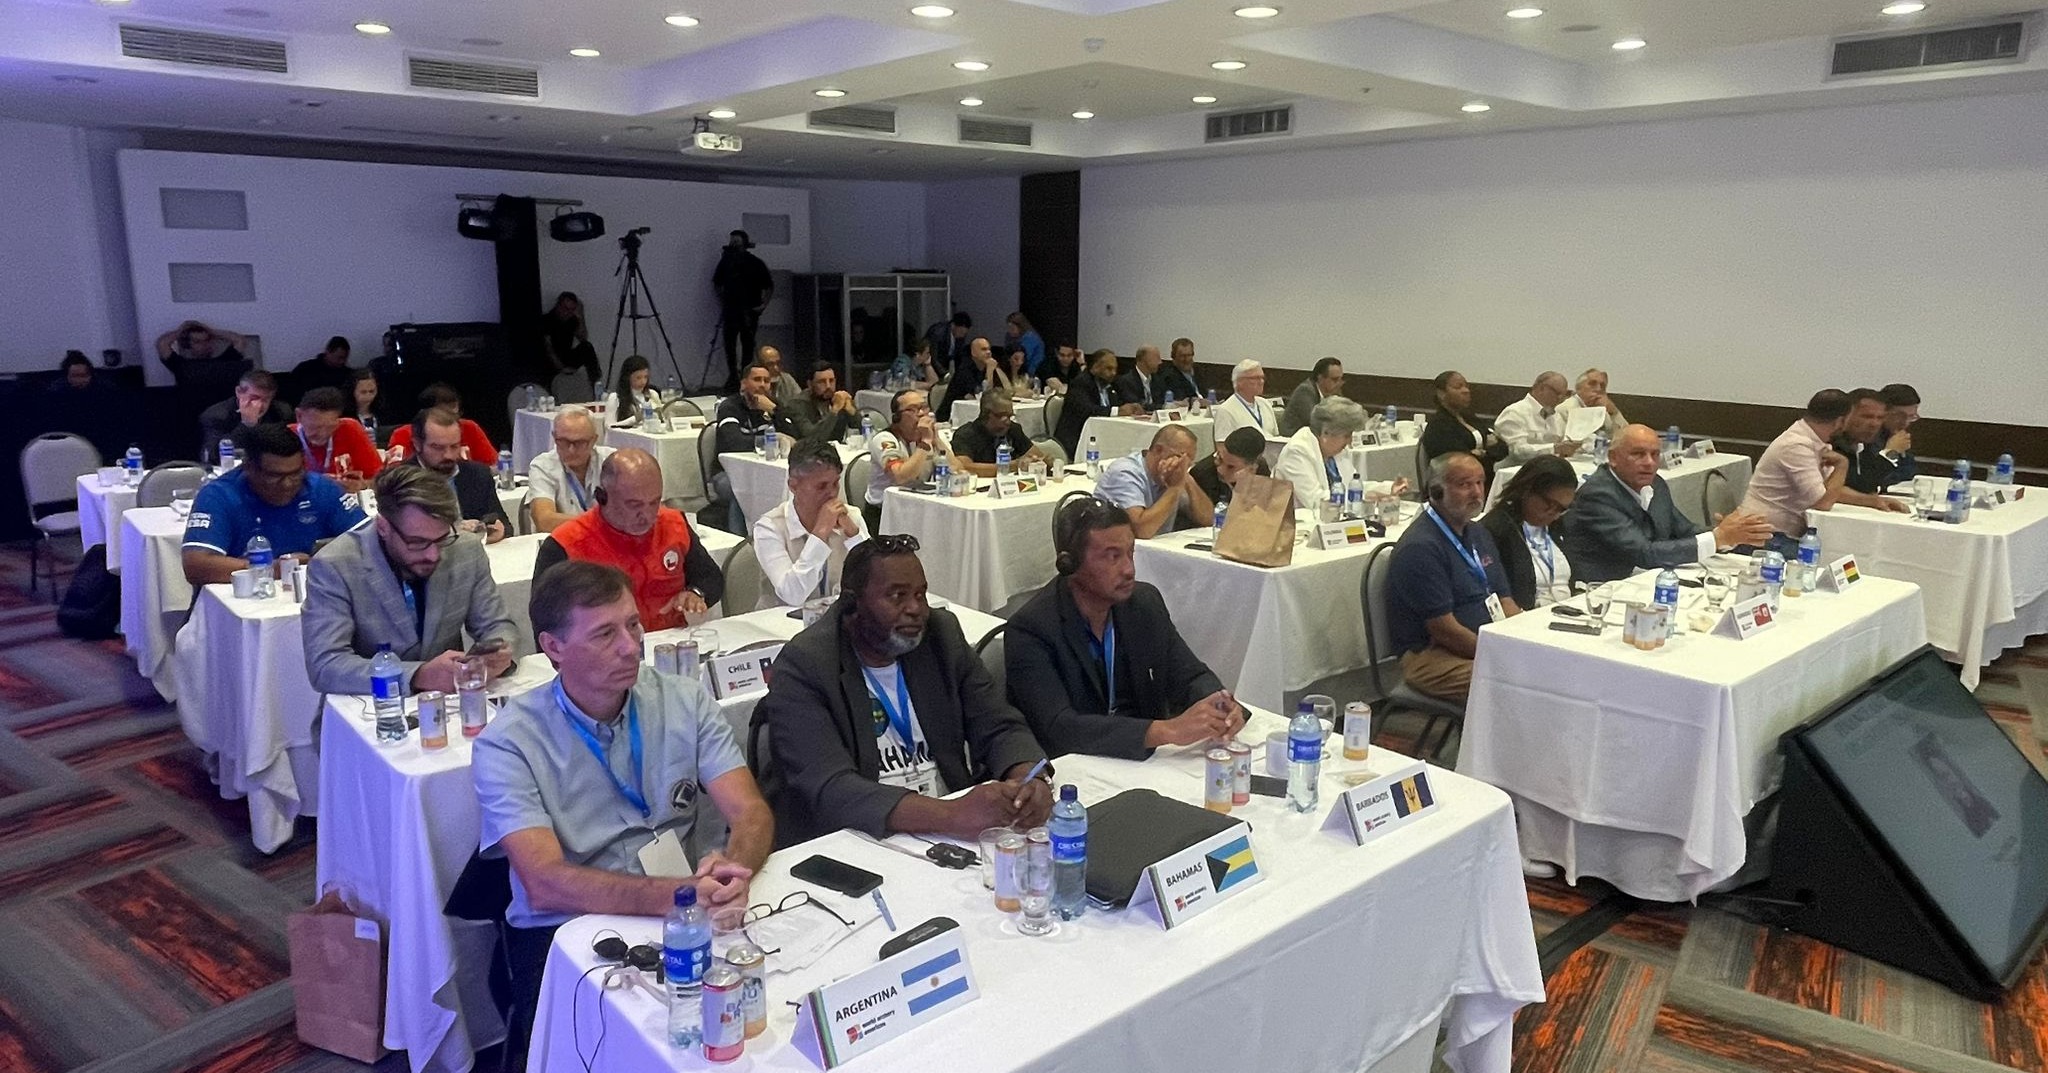 Archery Guyana represented at World Archery Americas General Assembly in Medellin